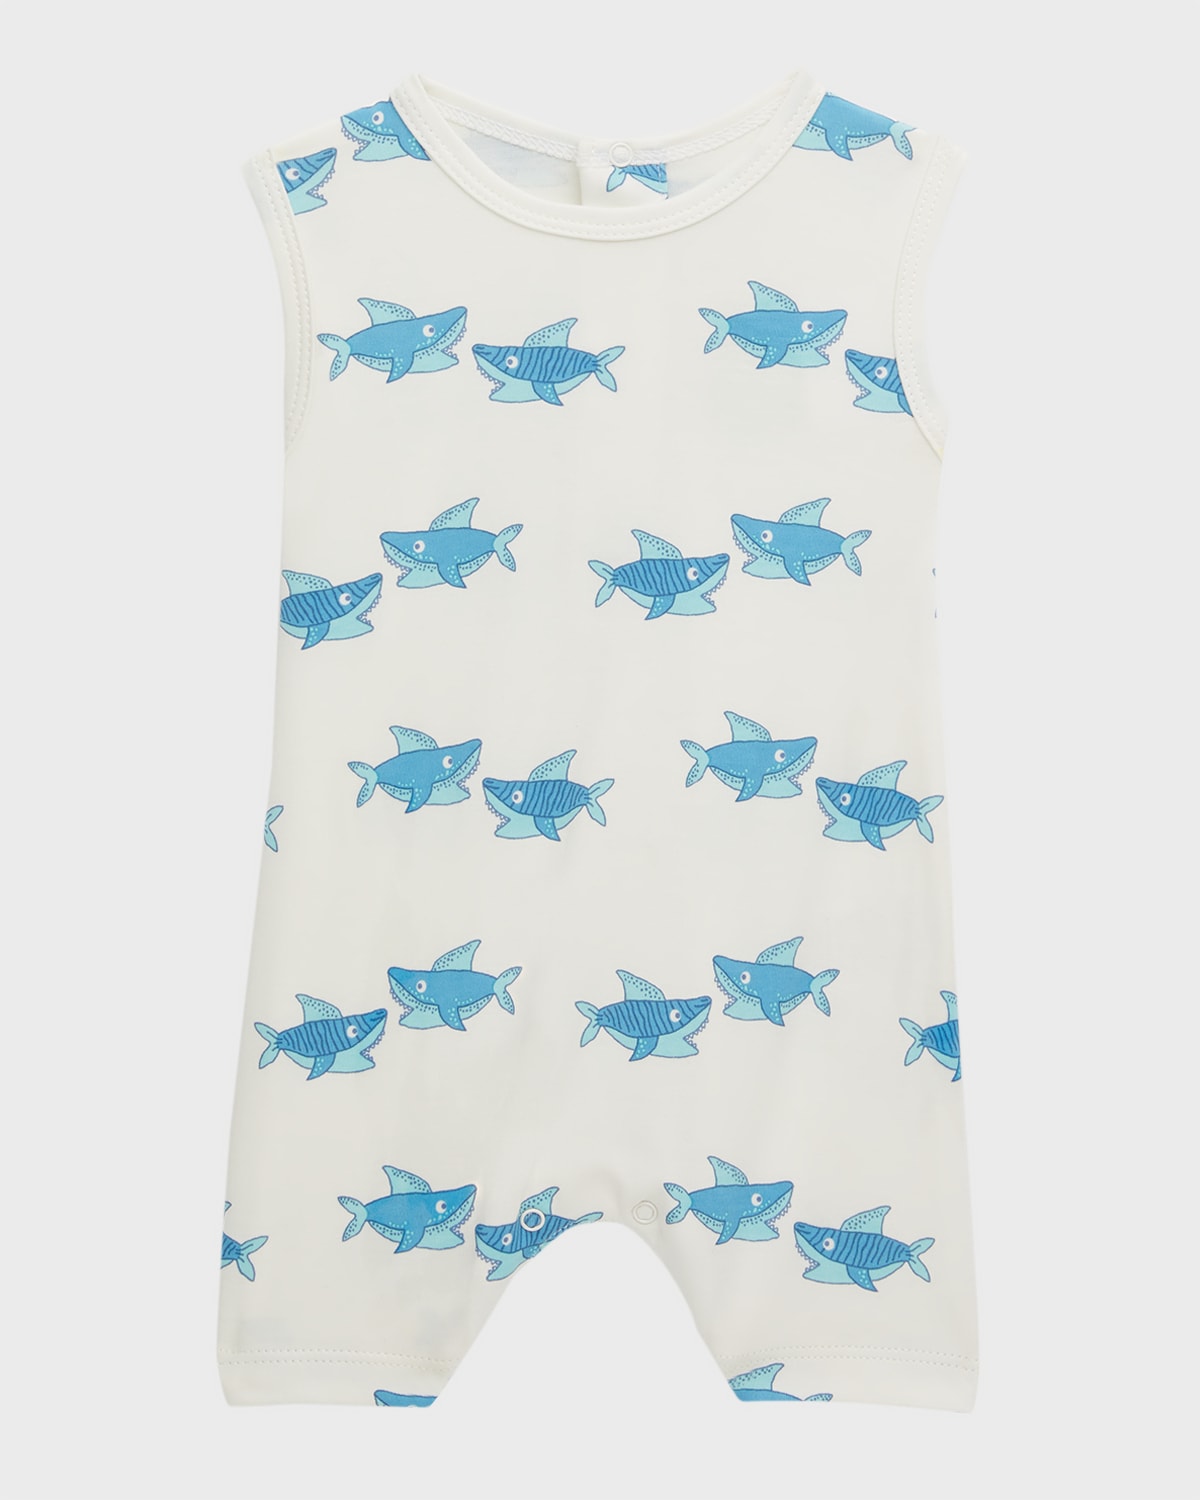 Boy's Cool Sharks Printed Playsuit, Size 3M-24M